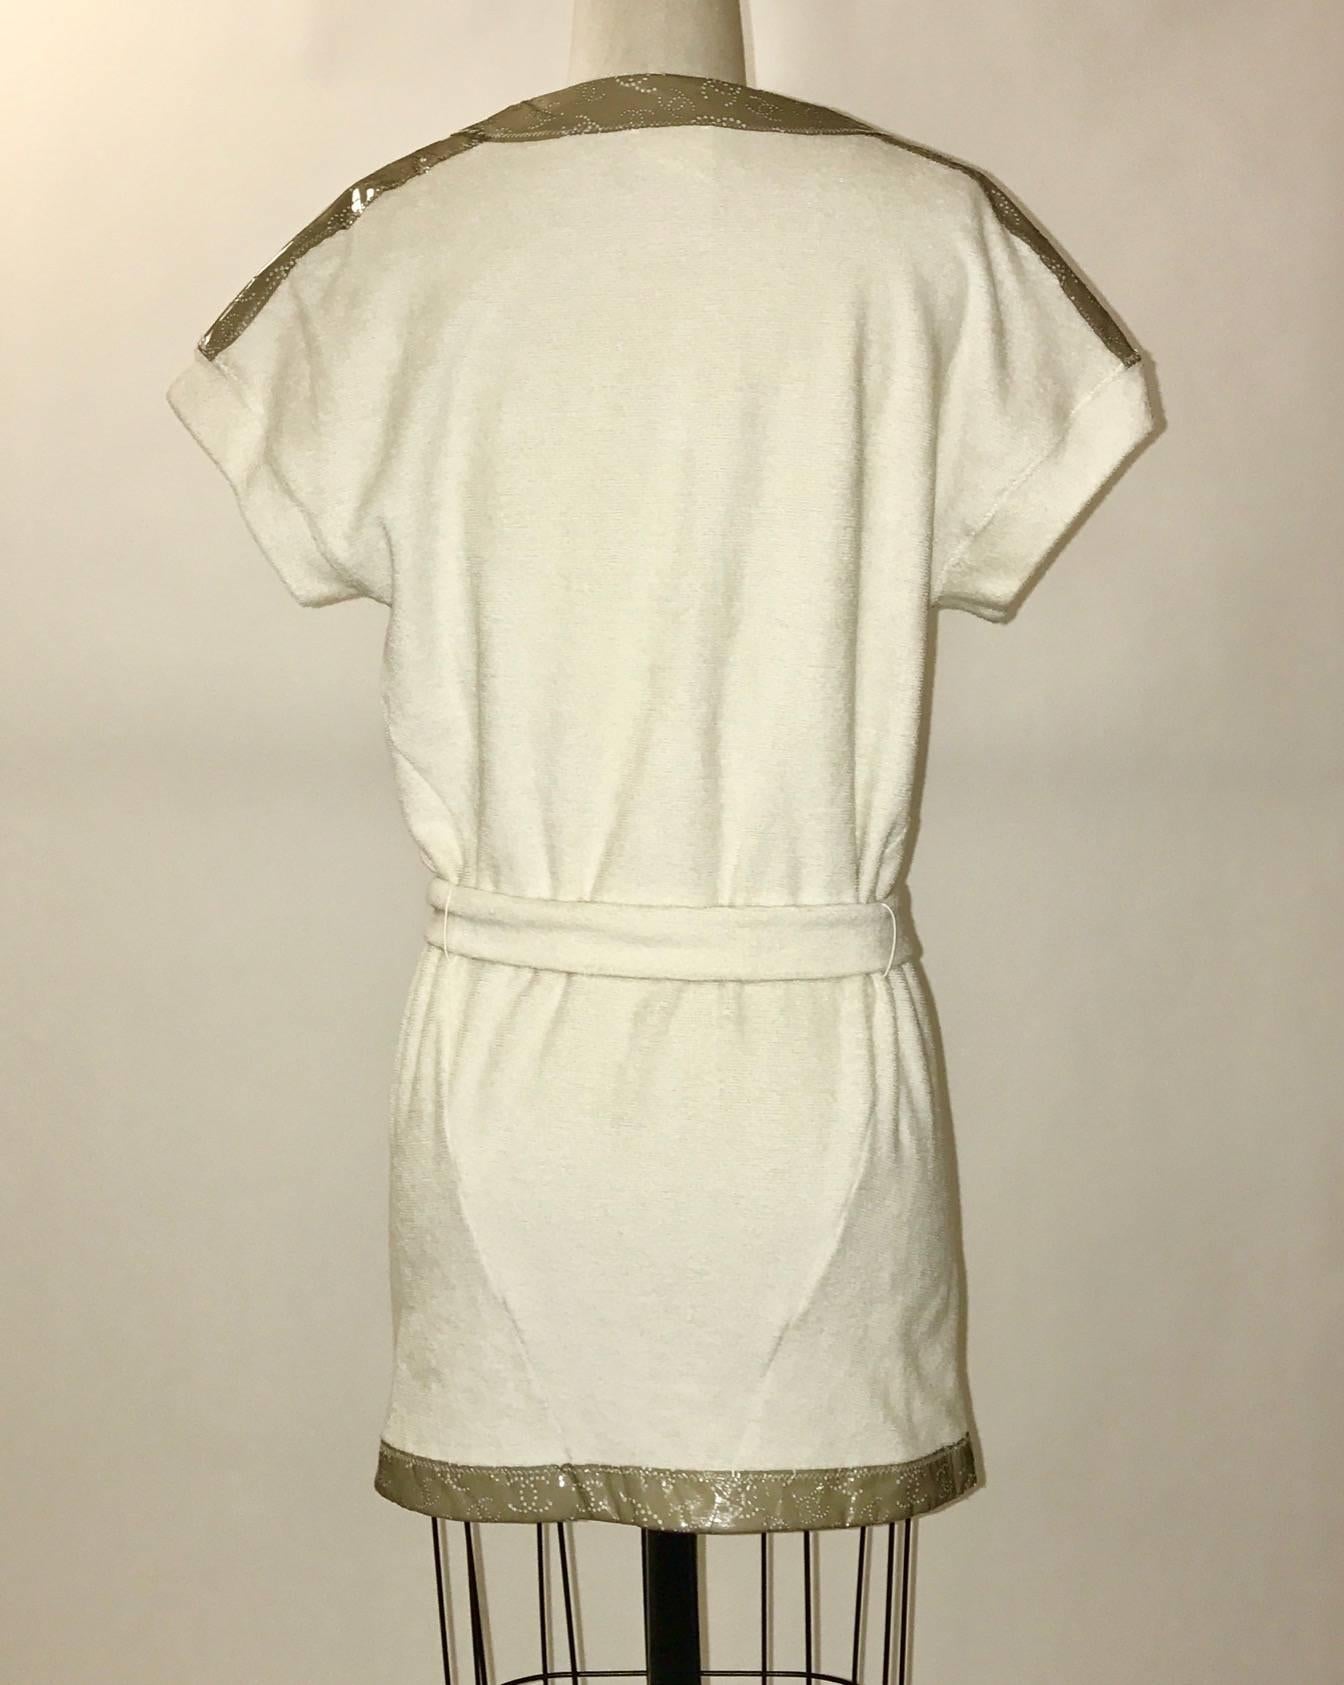 Chanel 09C short cream terry cloth robe with taupe-grey trim featuring perforated interlocking C logos. Short sleeves, removable belt. Perfect over a swimming suit for the beach or pool, or great for loungewear.

100% cotton.

Size FR 34, best